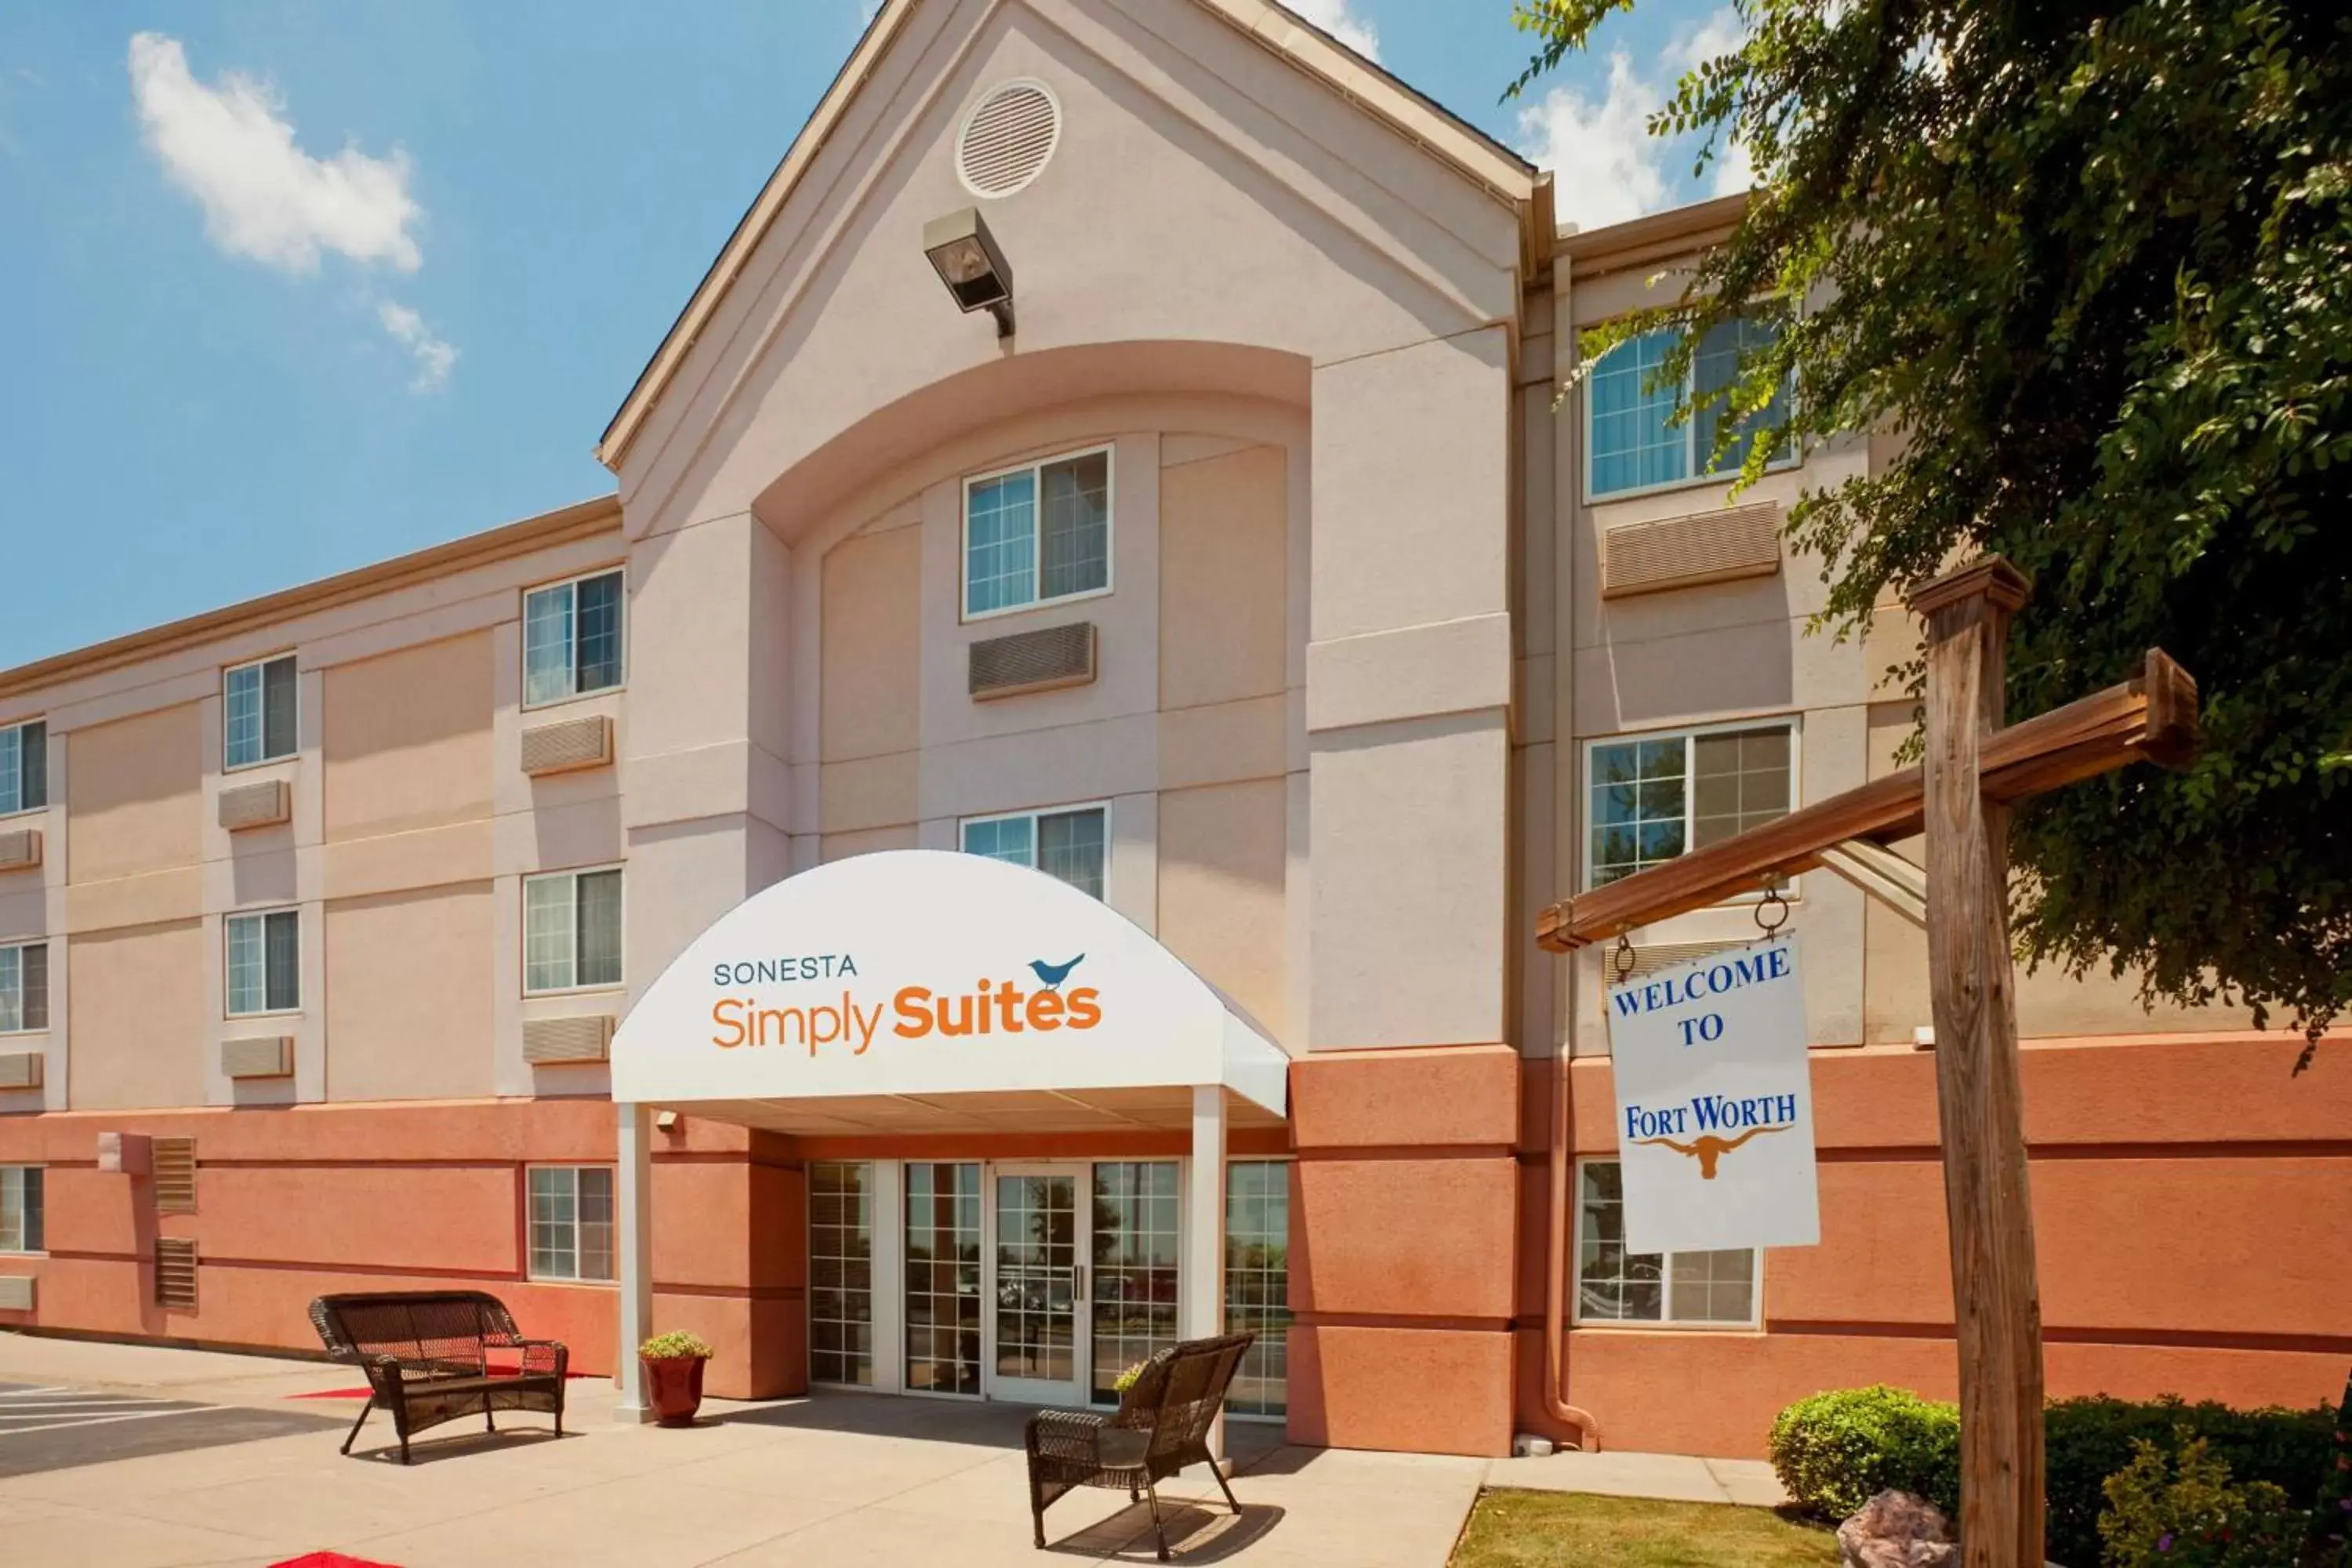 Property building in Sonesta Simply Suites Fort Worth